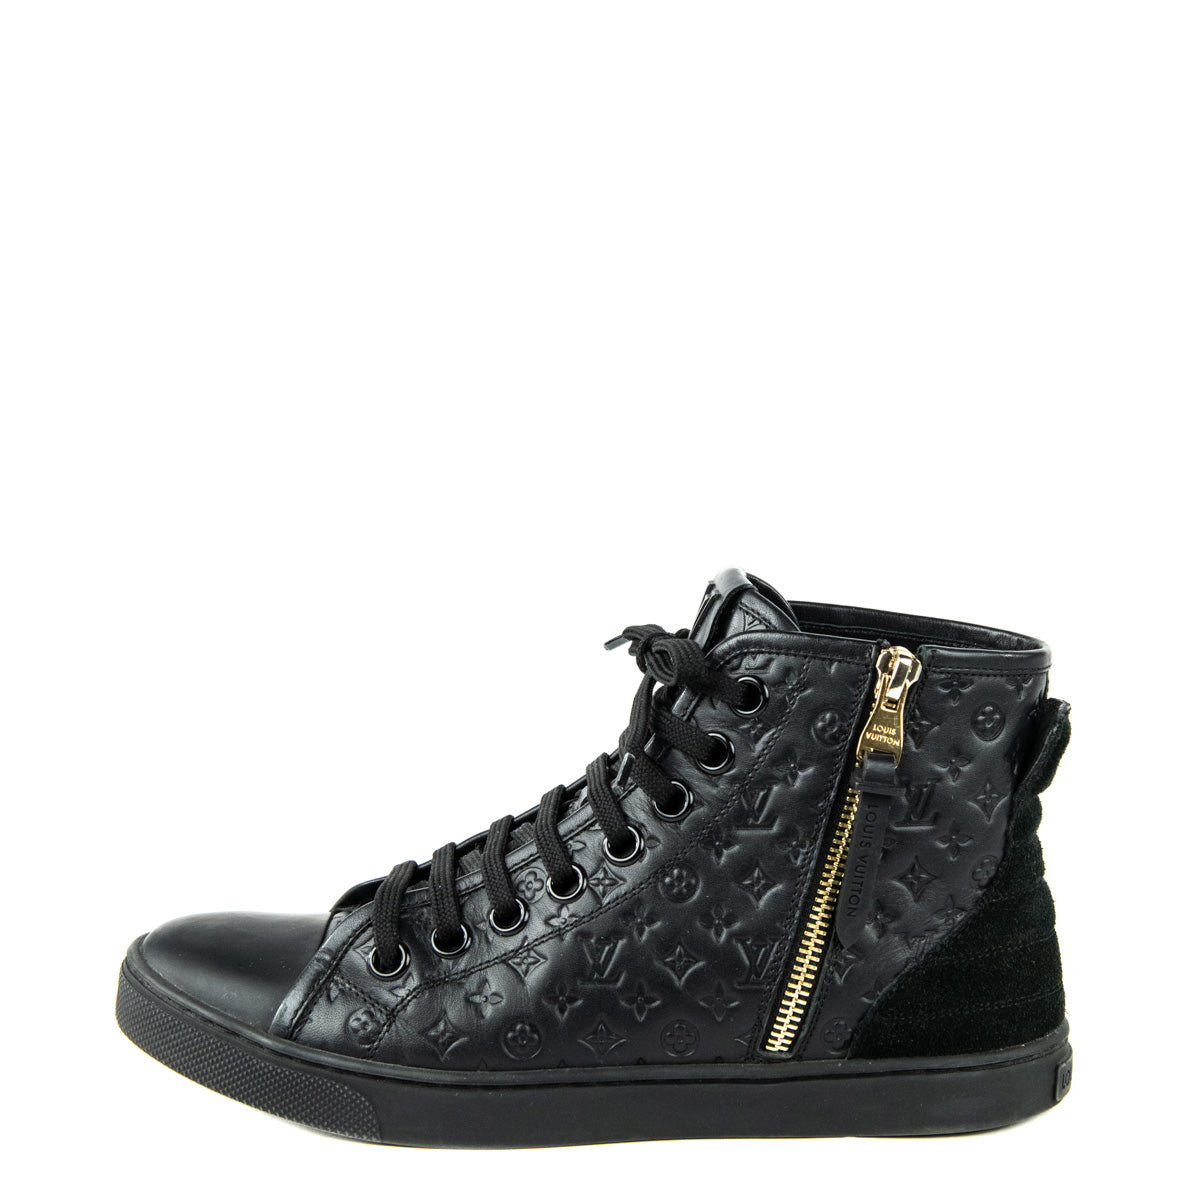 Used AS IS louis vuitton high top sneakers SHOES 6